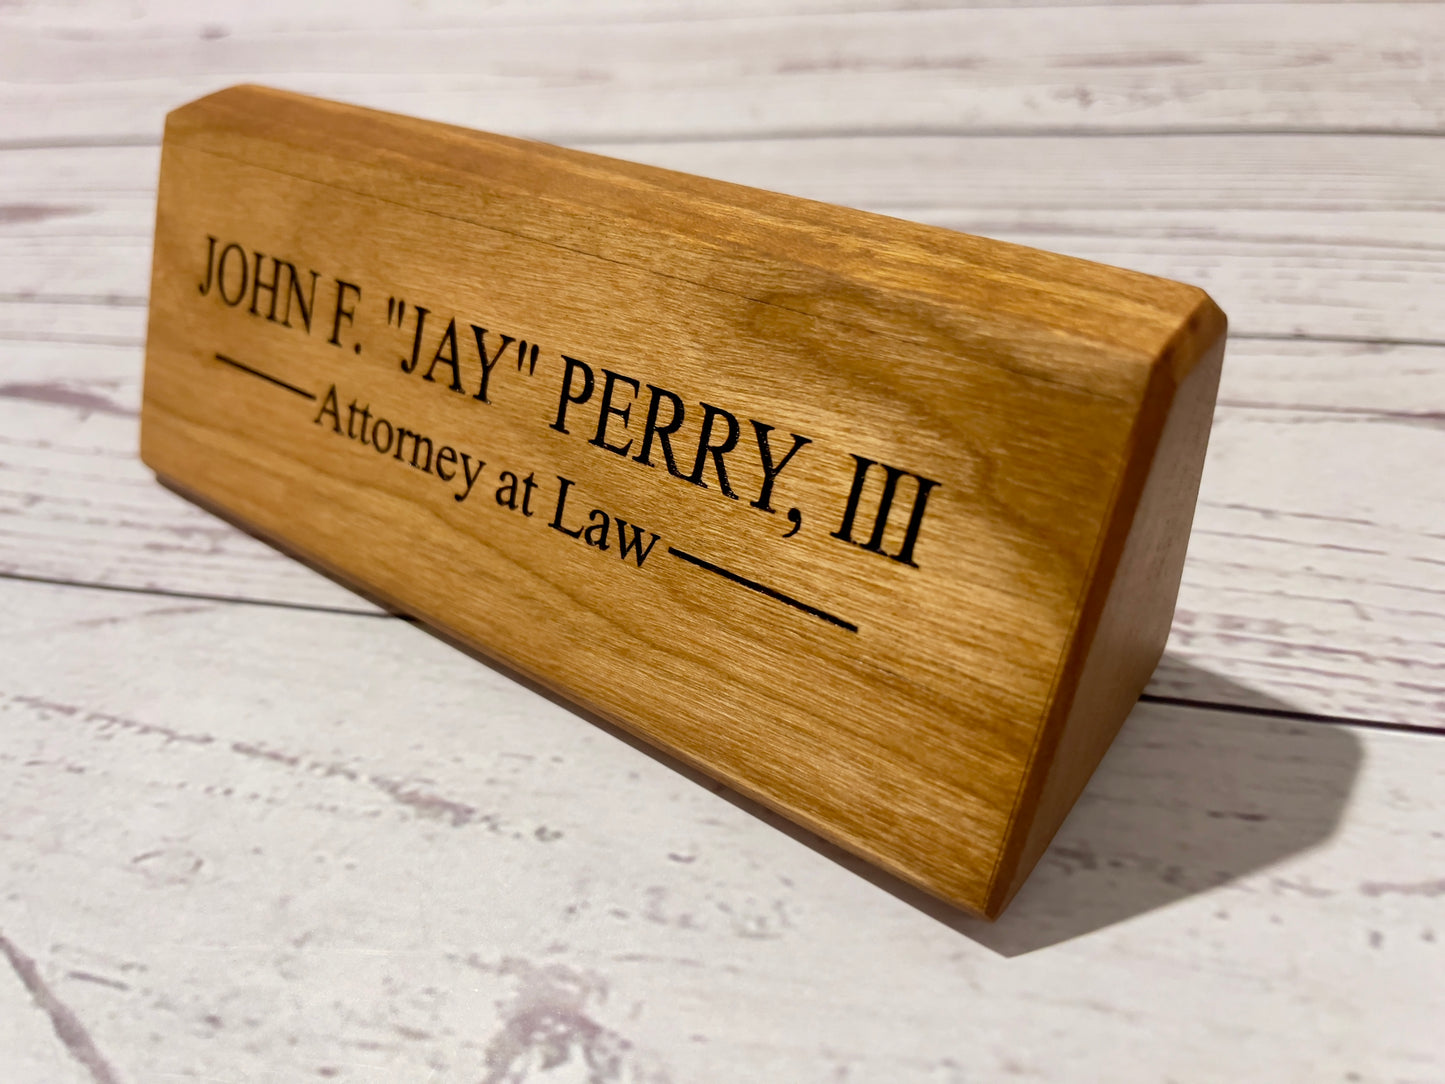 Personalized Cherry Wood Desk Name Plates, Custom Engraving, Executive Personalized Desk Name Plate.